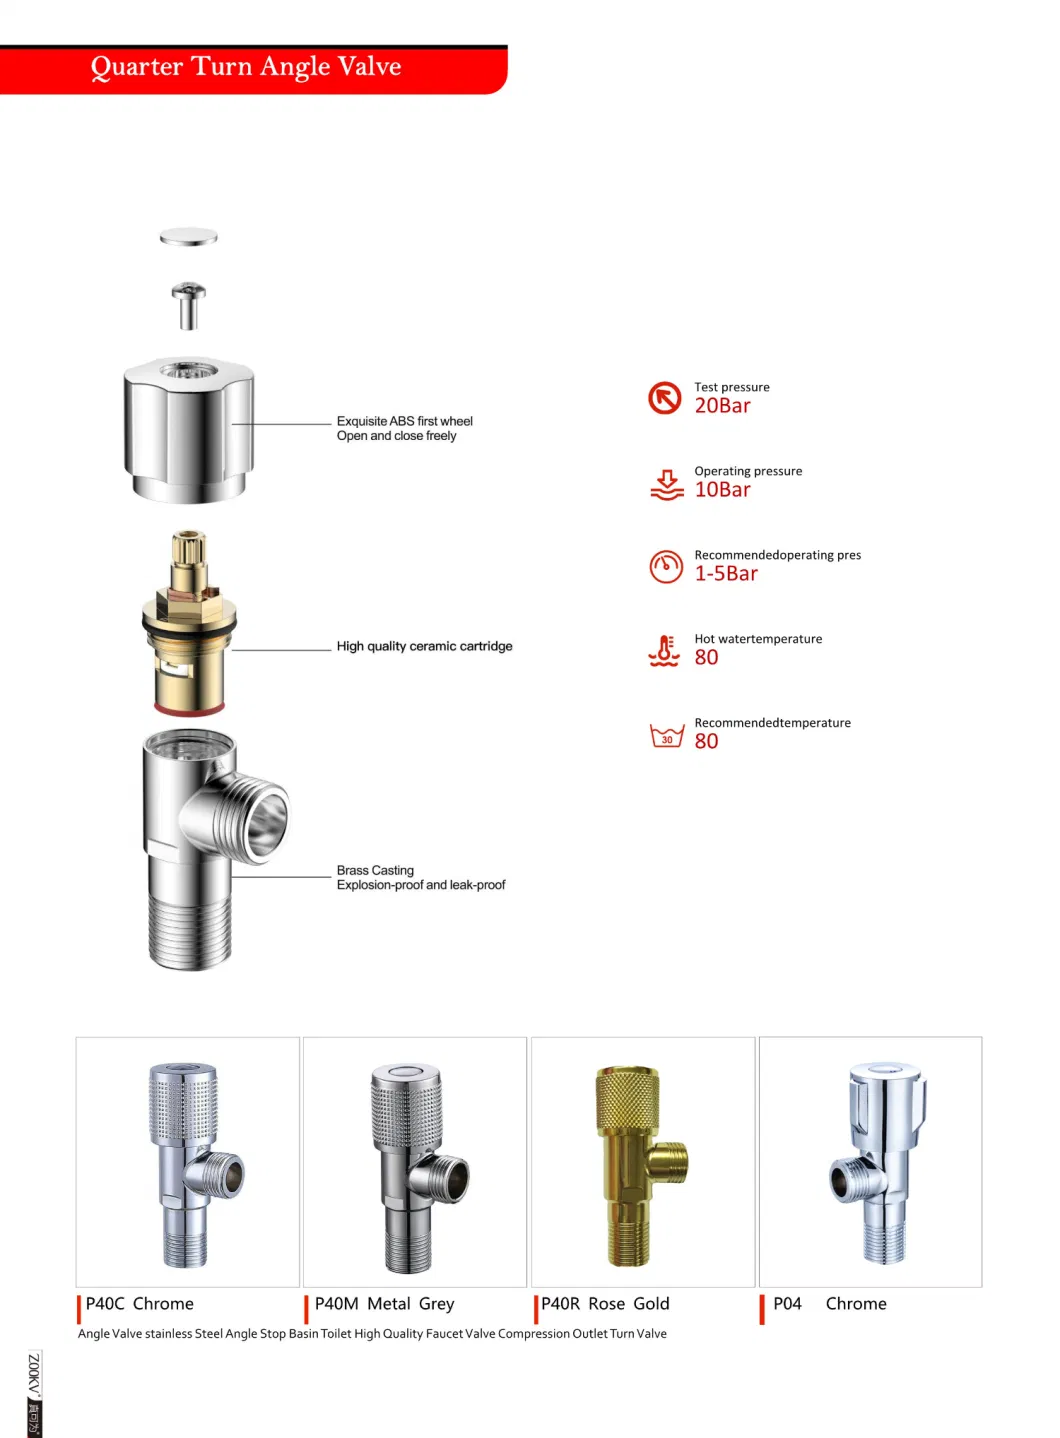 Kitchen Bathroom Brass Stainless Steel Angle Valve Quarter Turn Double Square Wall Mounted Stop Ball Angle Valve with Flange Chrome Plated